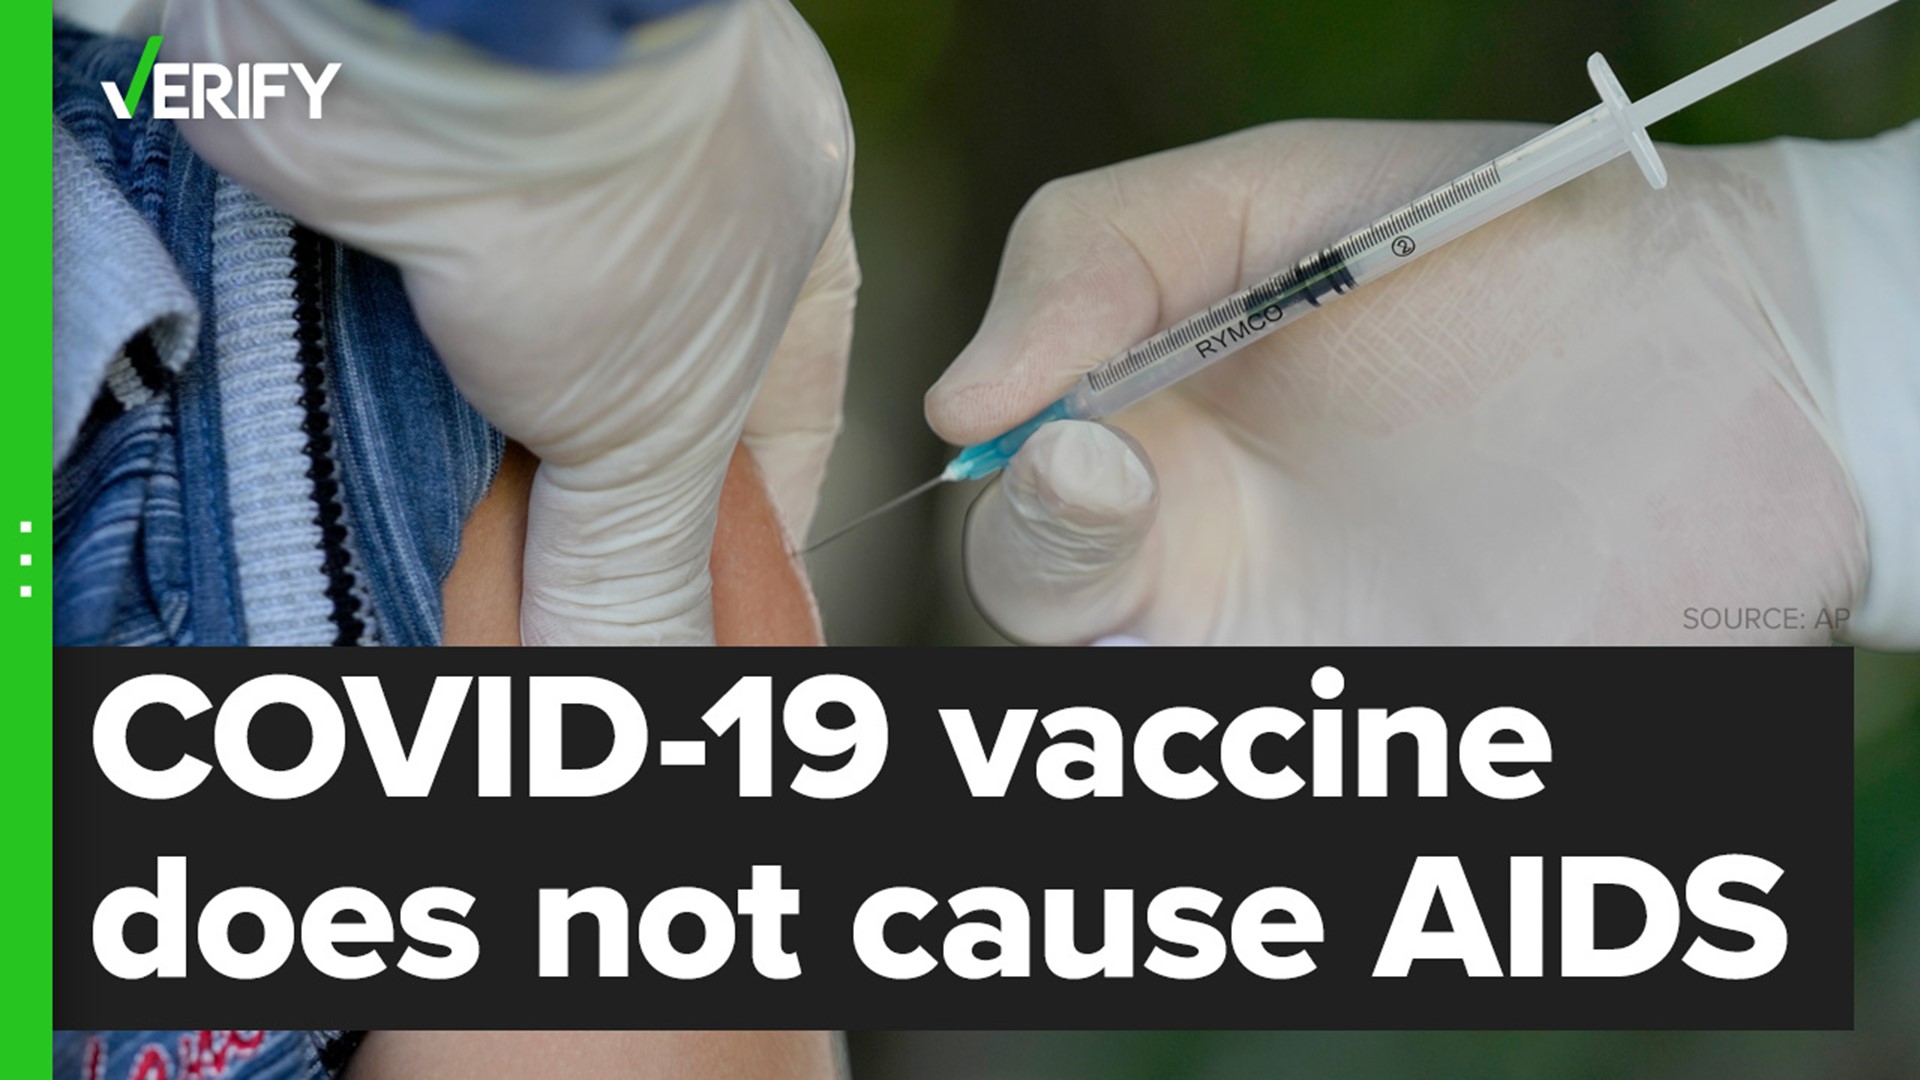 Neither AIDS nor HIV can be spread through the COVID-19 vaccine.